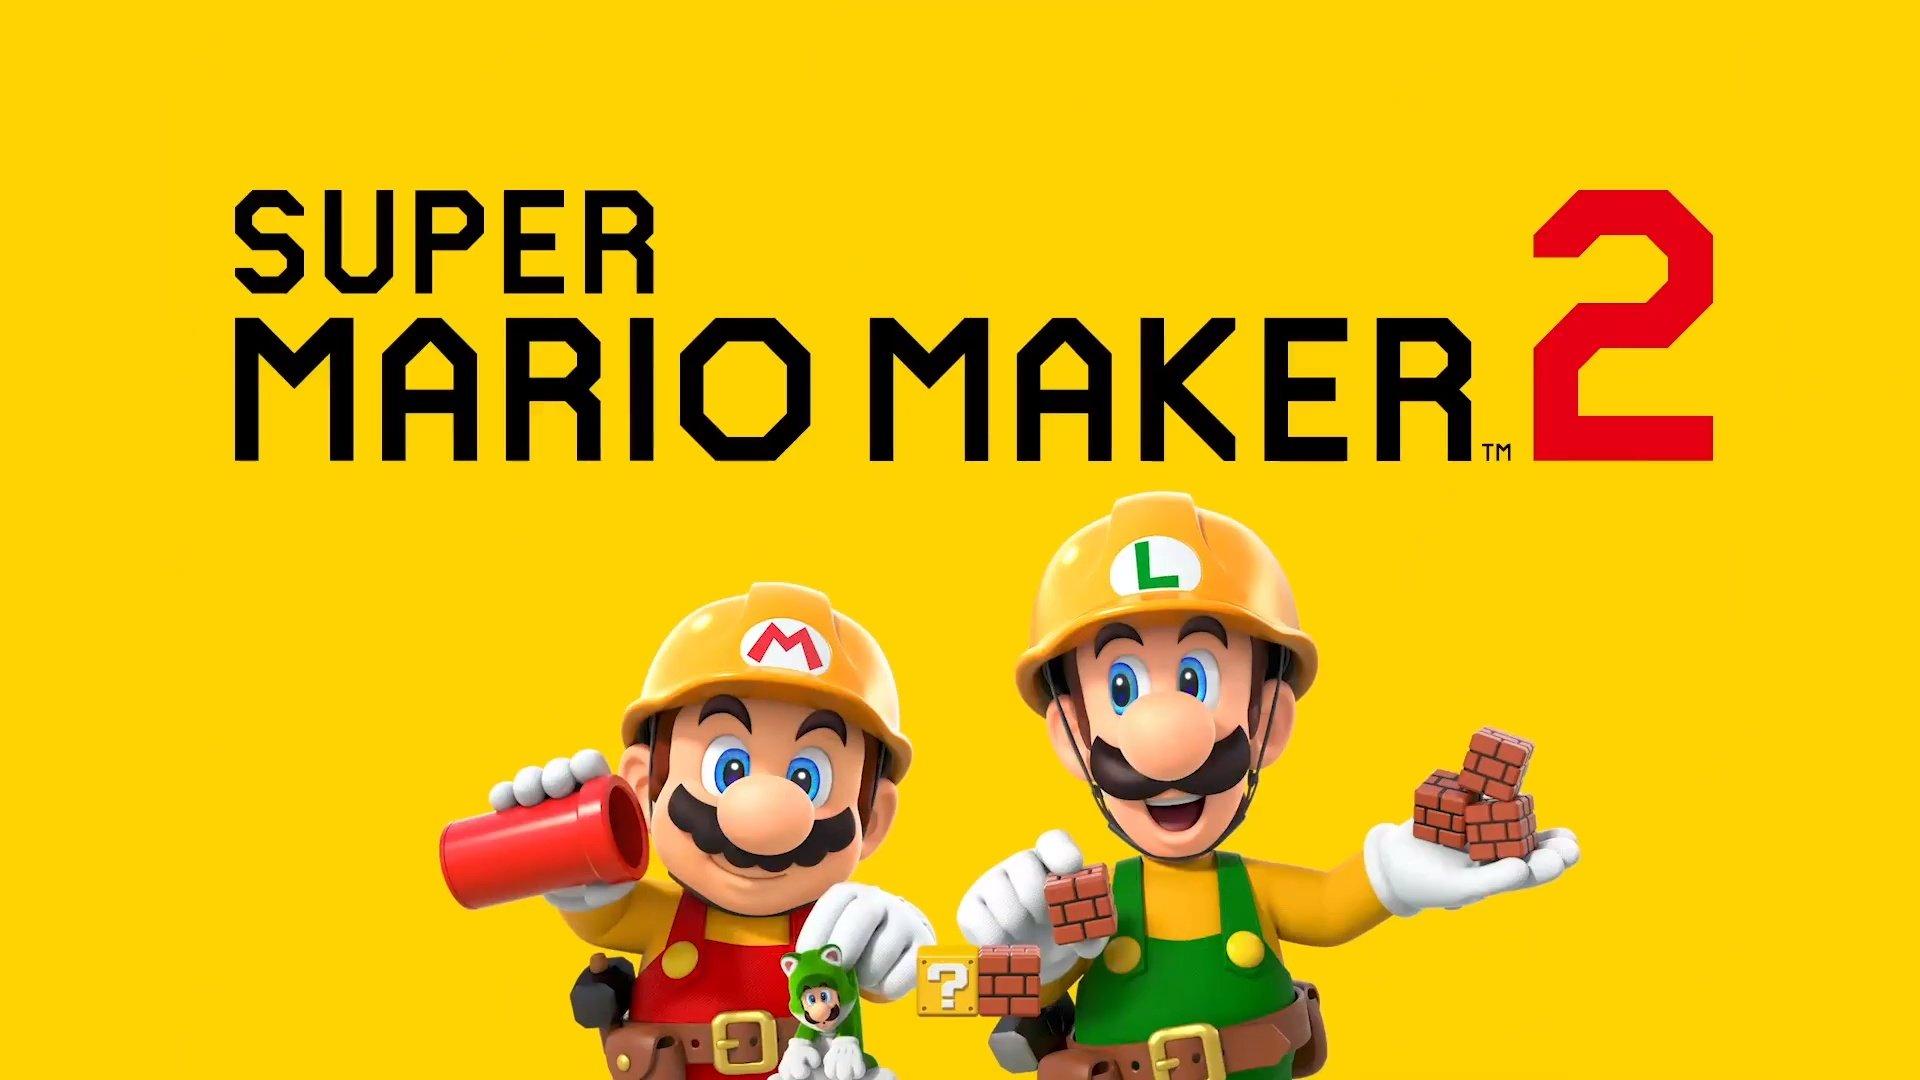 Super Mario Maker 2' hits the Switch this June